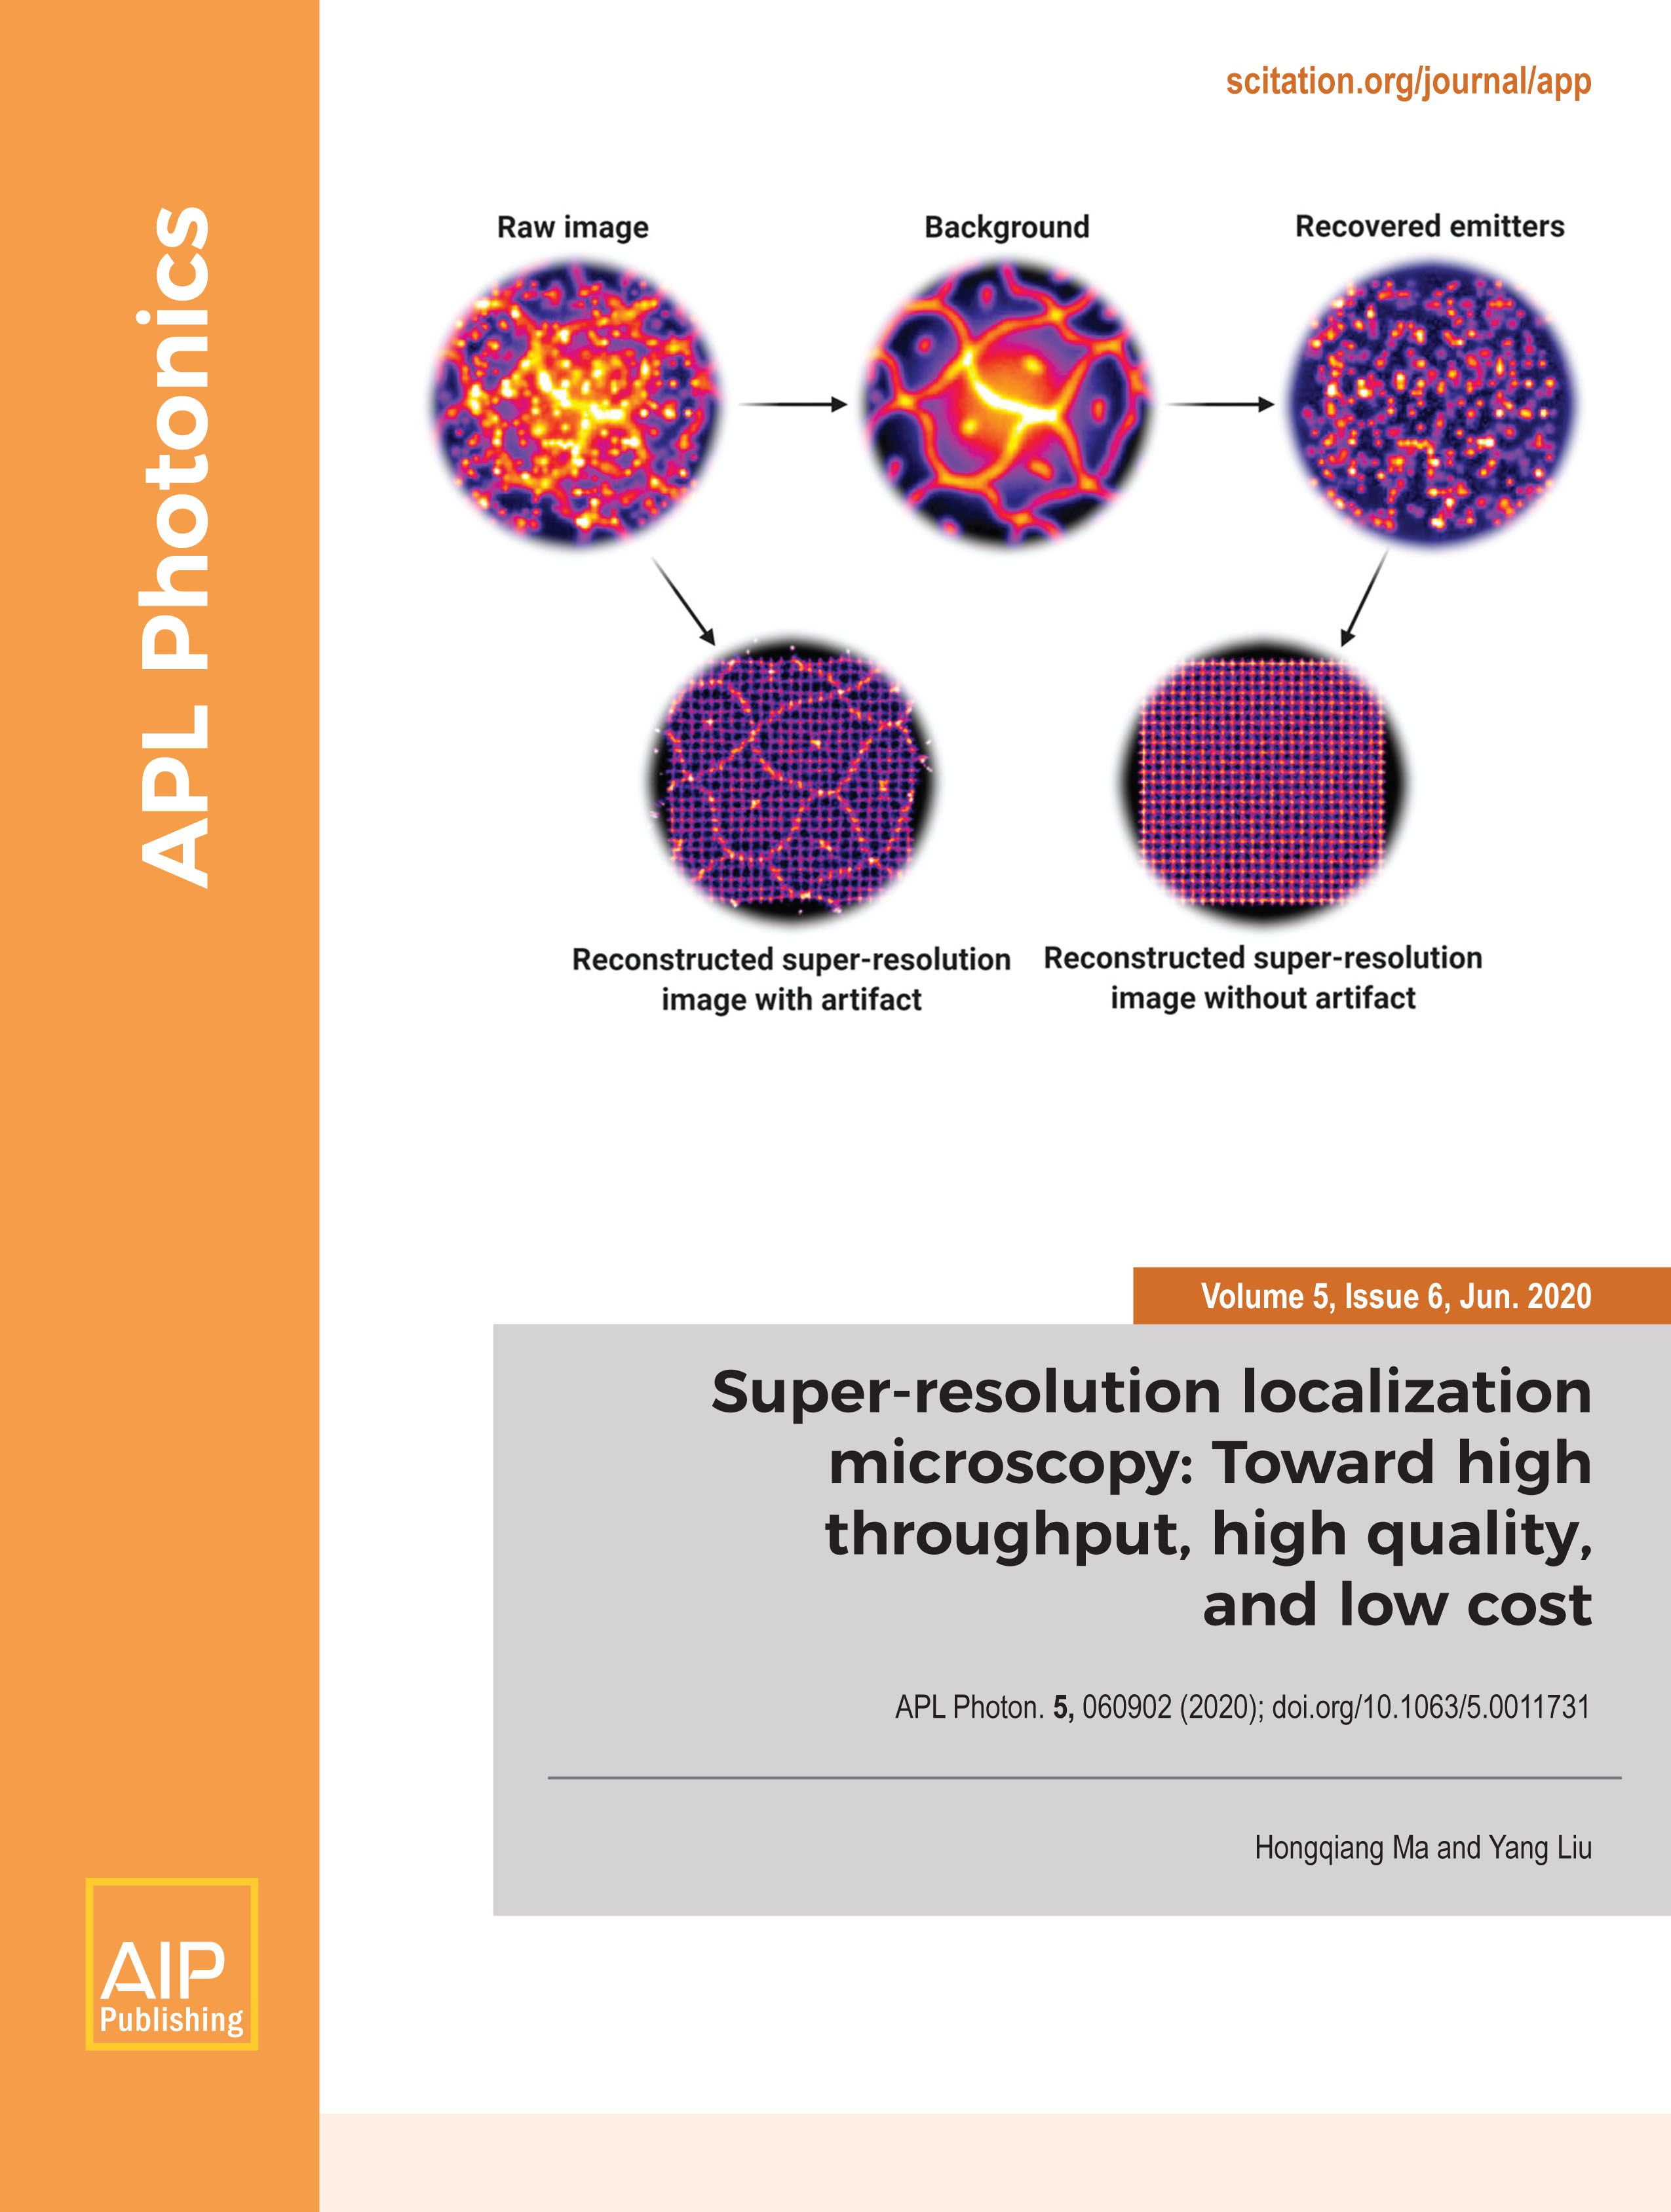 Super-resolution localization microscopy: Toward high throughput, high quality, and low cost